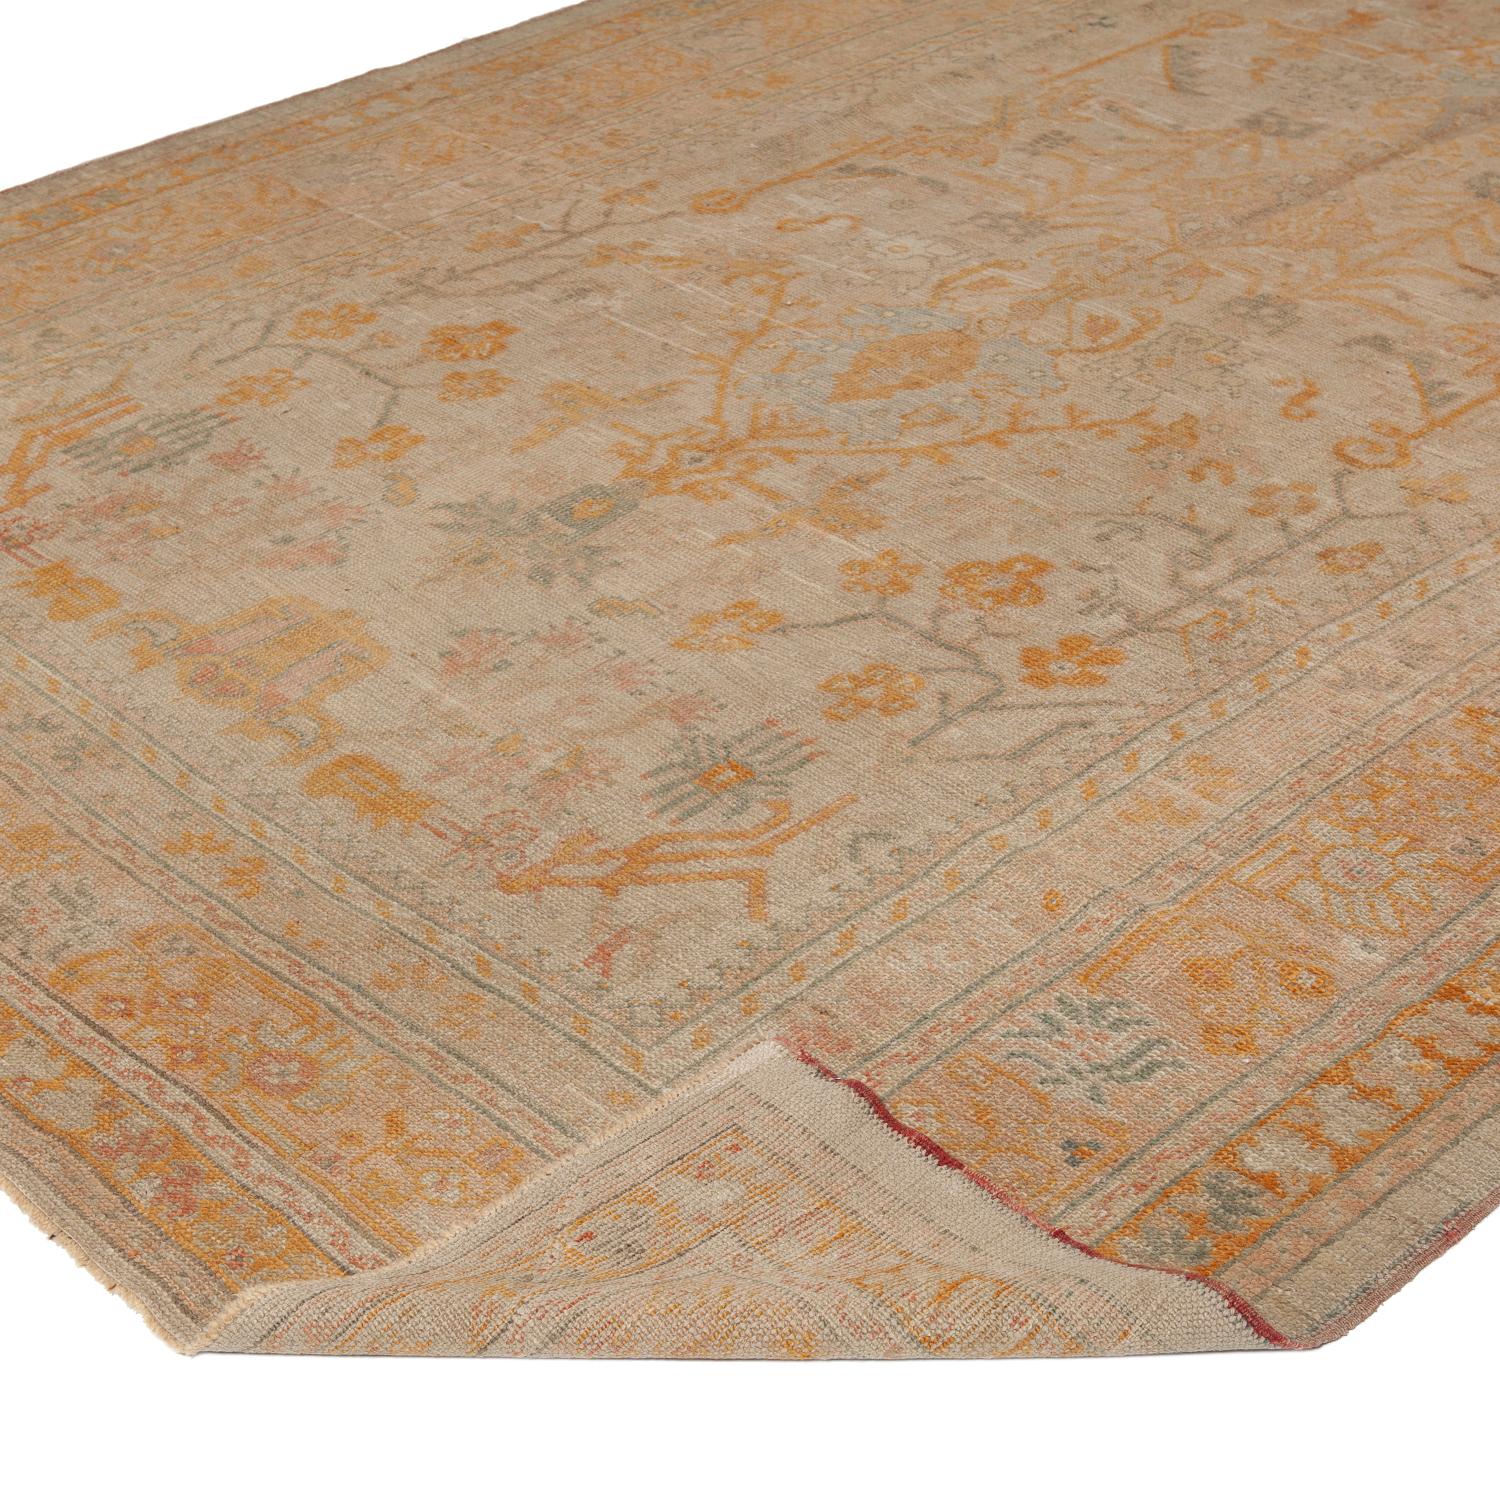 Hand-Knotted abc carpet Beige Vintage Traditional Wool Oushak Rug - 8'2